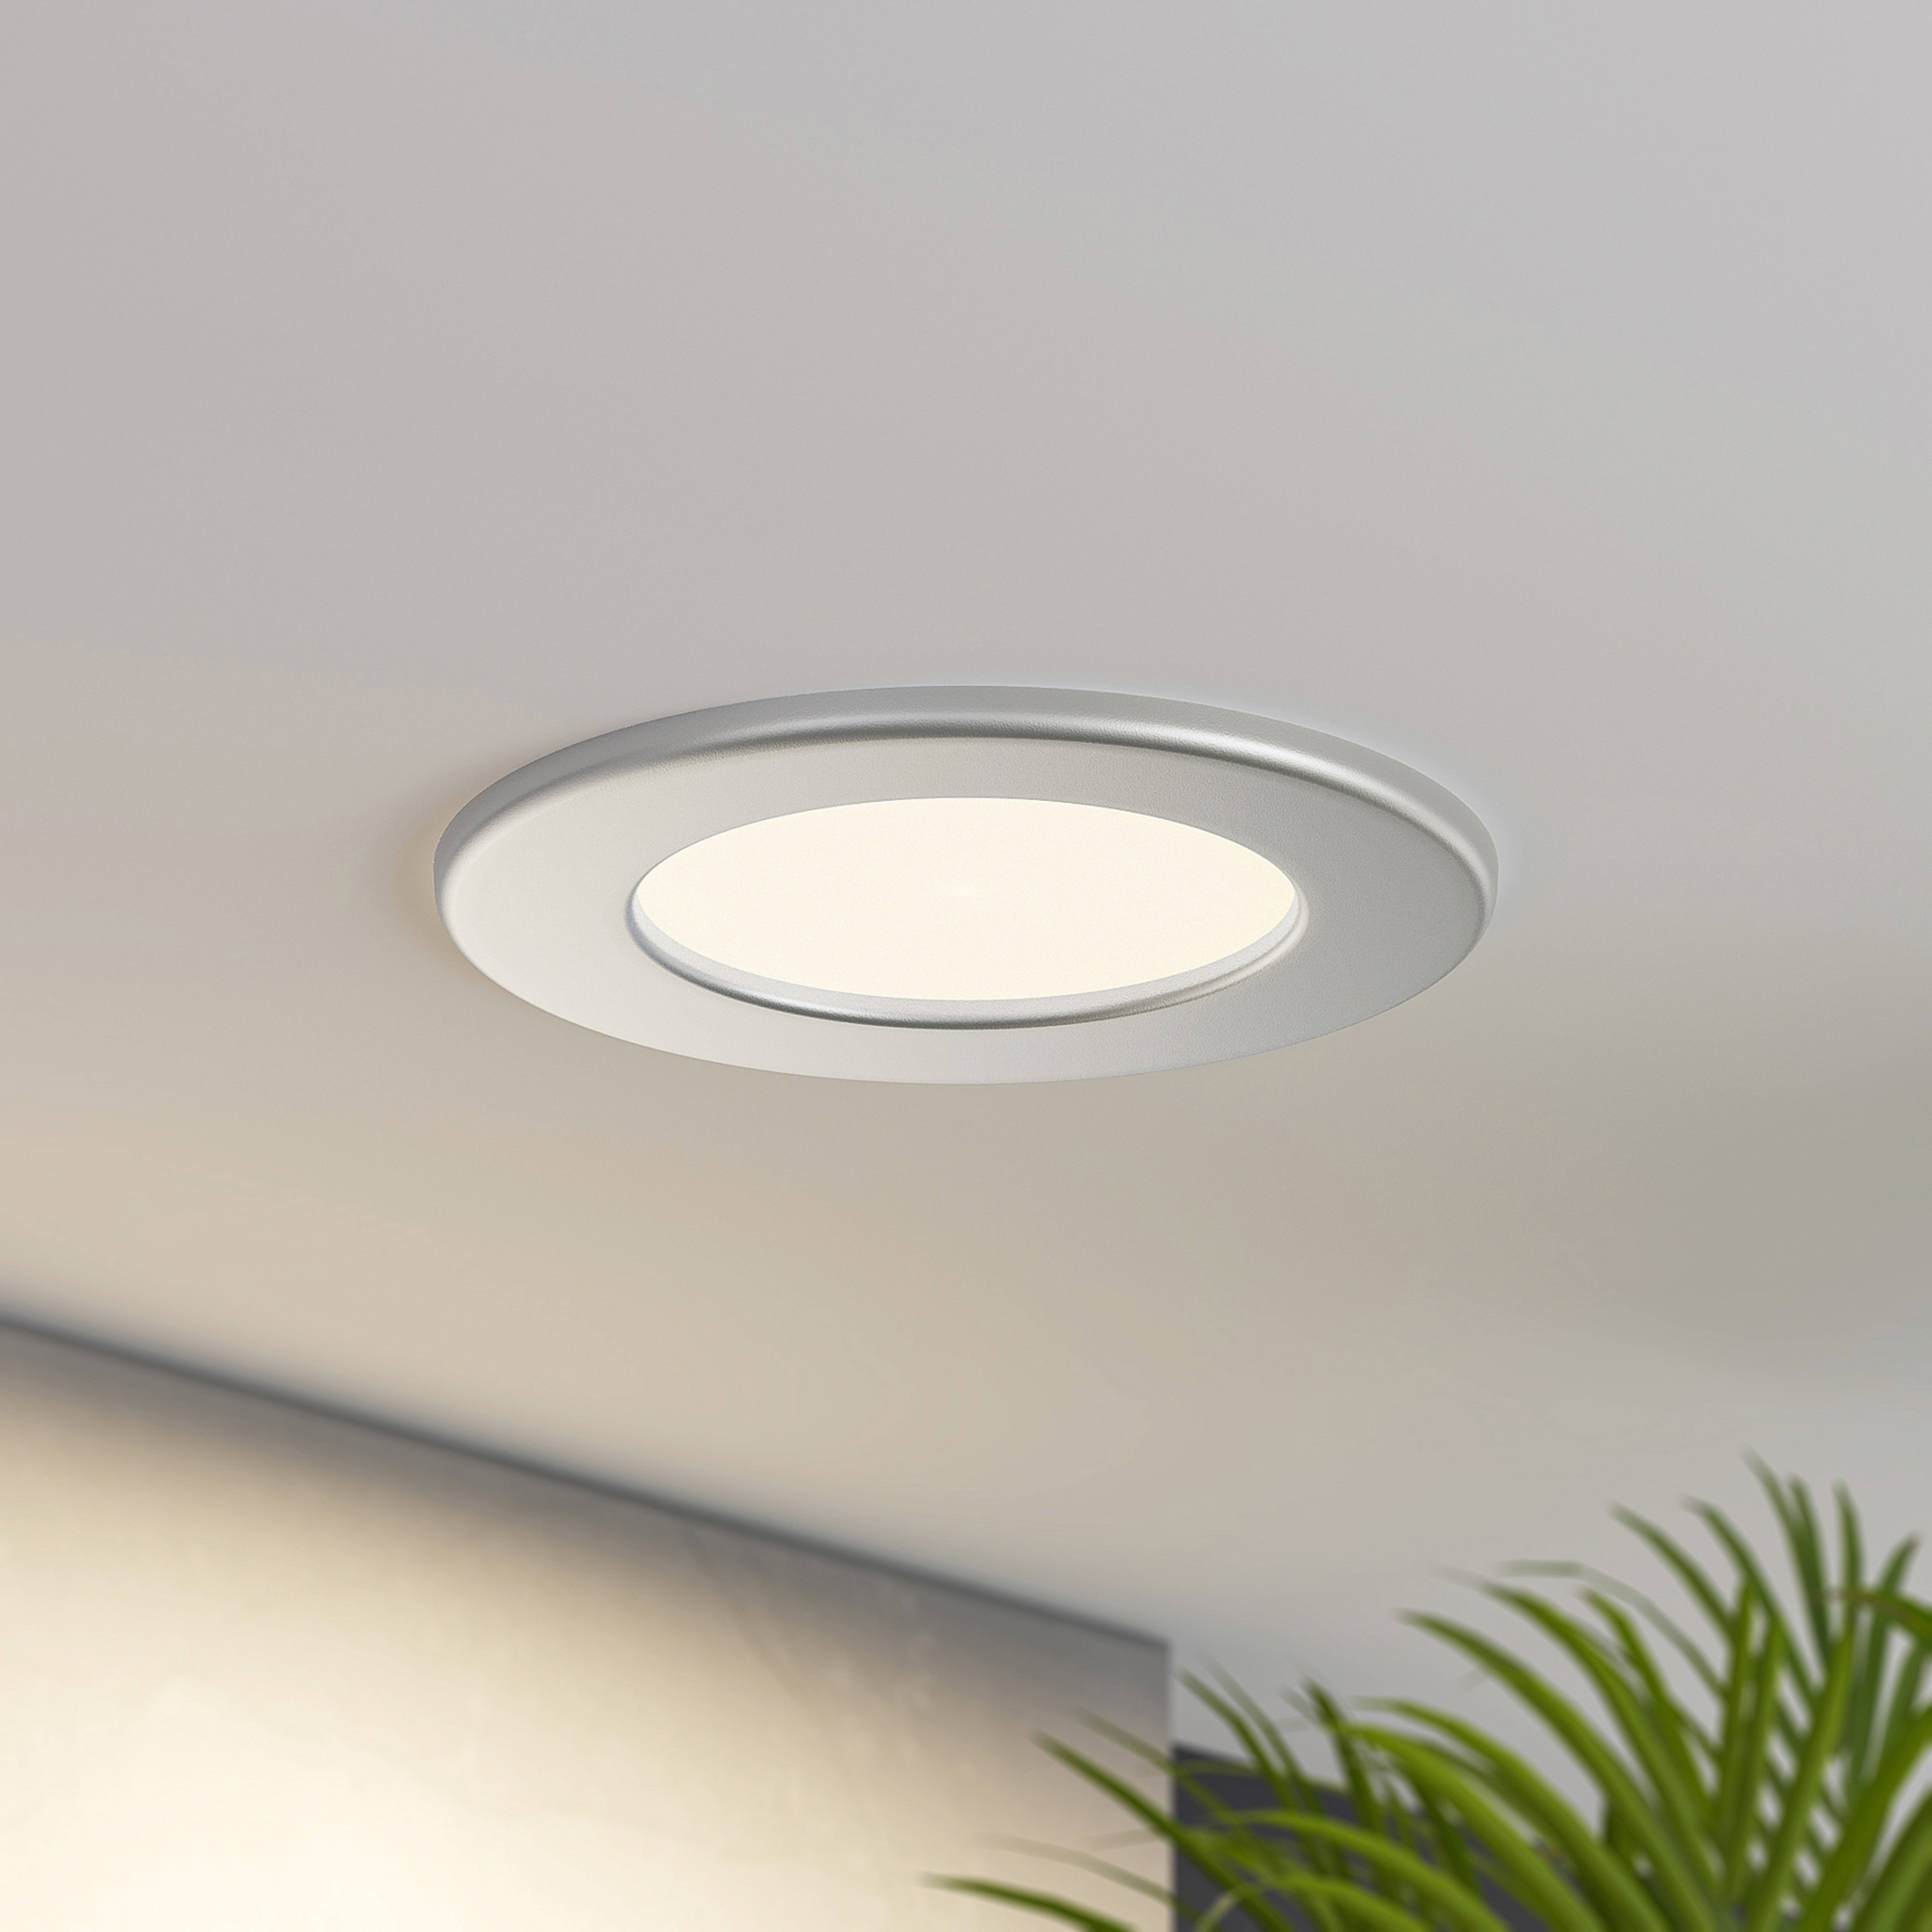 Prios LED recessed light Cadance, silver, 11.5 cm, dimmable